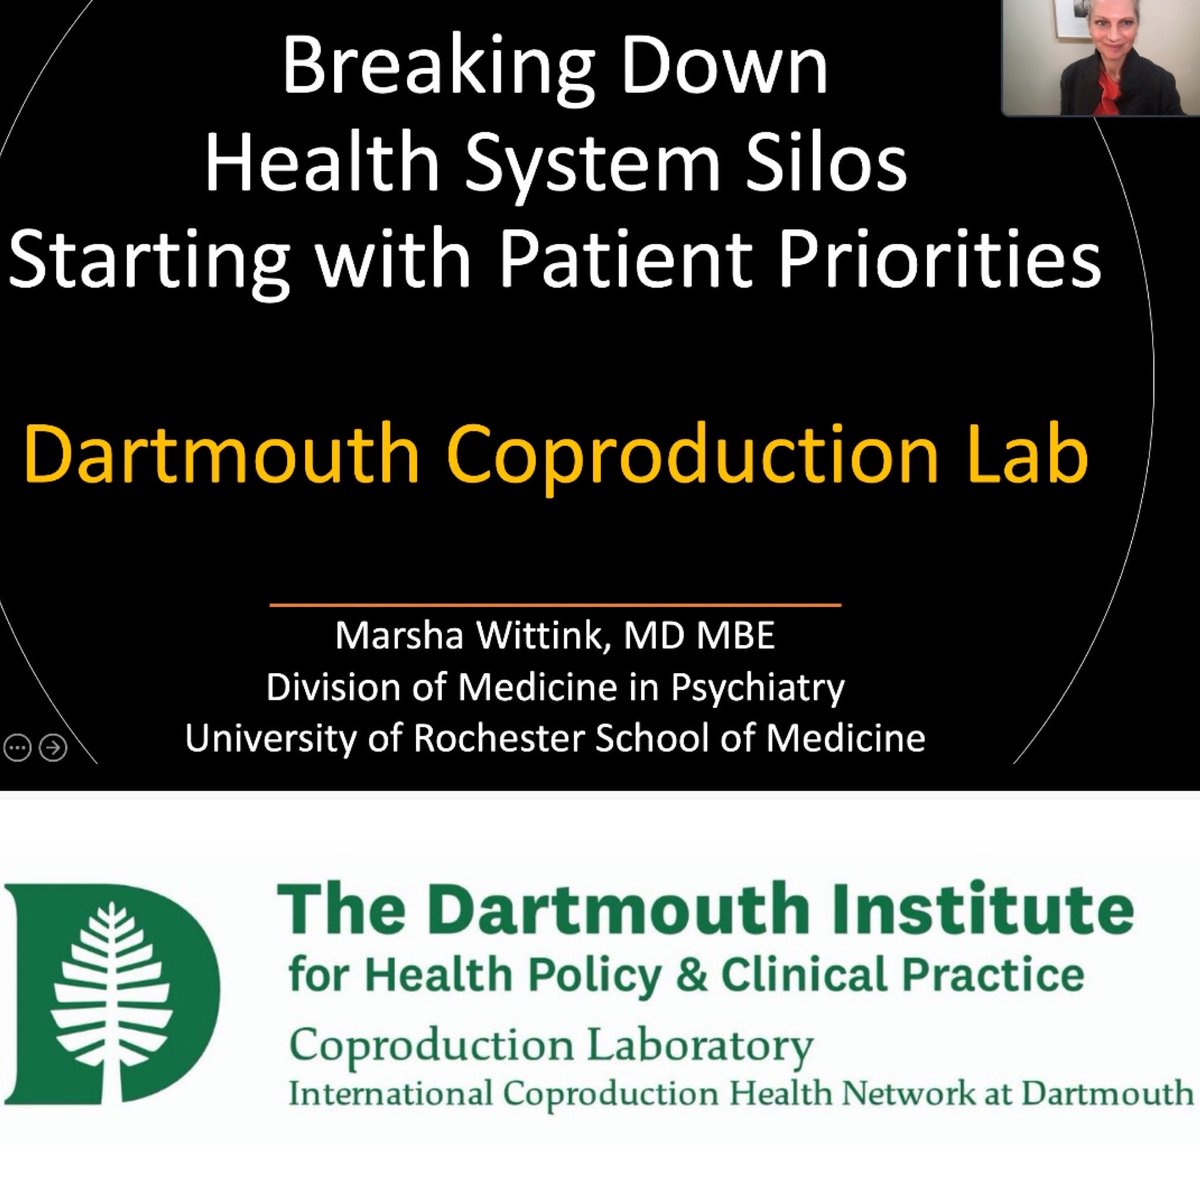 An honor to talk with ⁦@glynelwyn⁩ ⁦@TDICoproduction⁩ about partnering with patients to change healthcare and how #integratedcare interventions like #MedPsychunits can lead to #healthcarereform ⁩⁩ ⁦@RANDCorporation⁩ ⁦⁦@DartmouthInst⁩